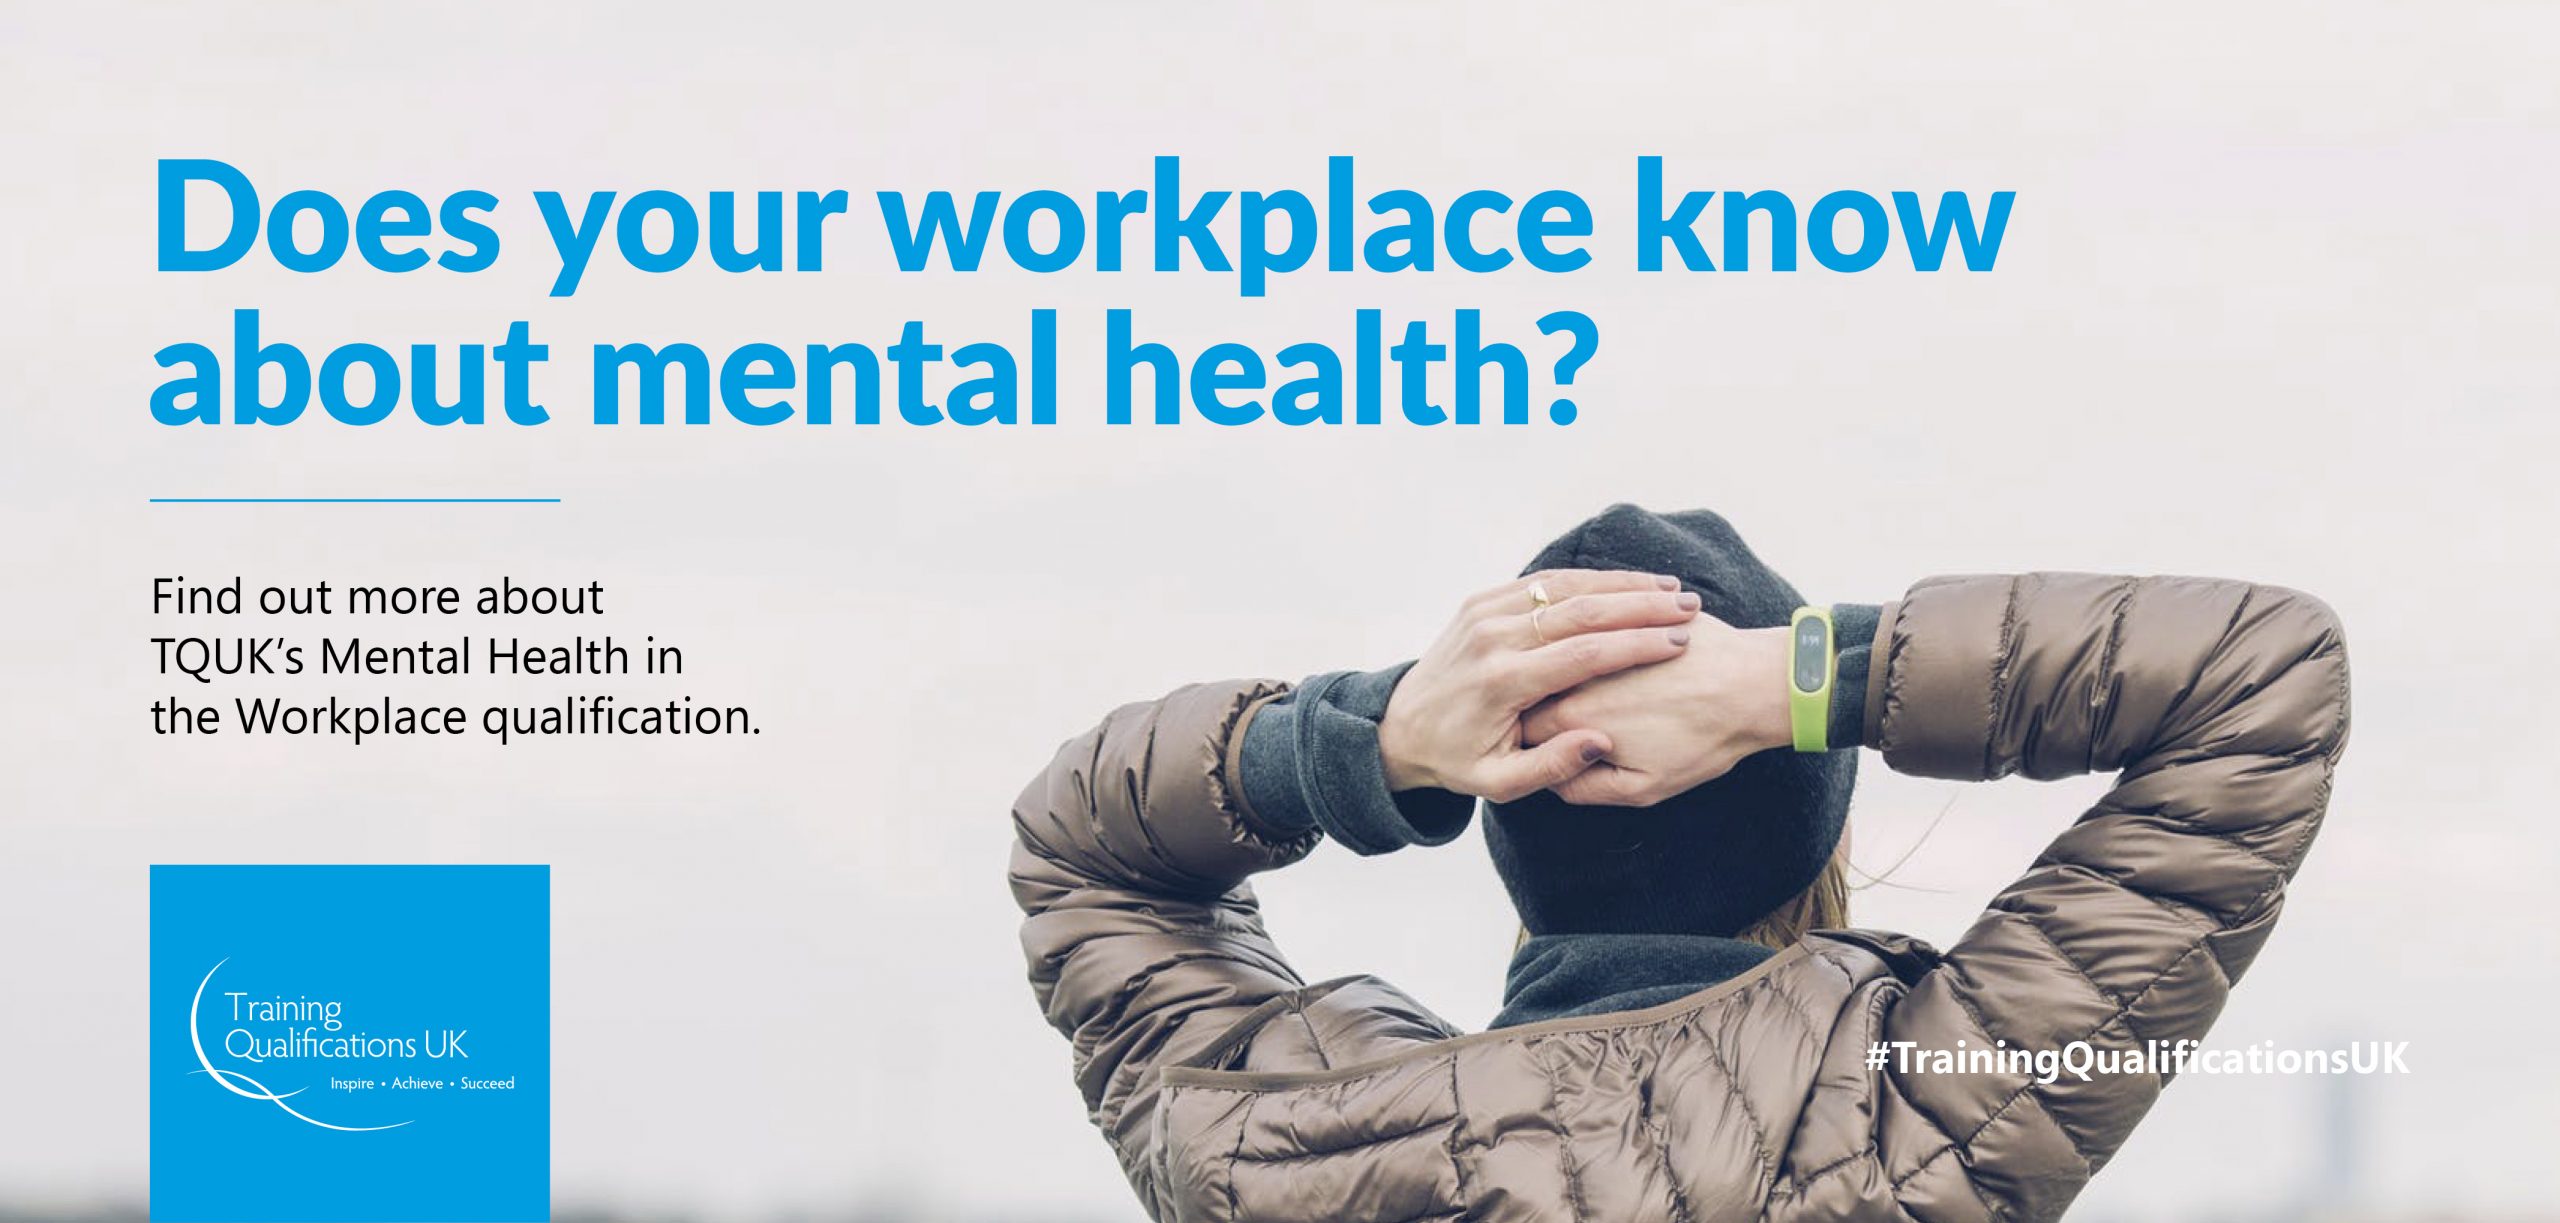 What do you know about mental health in the workplace?